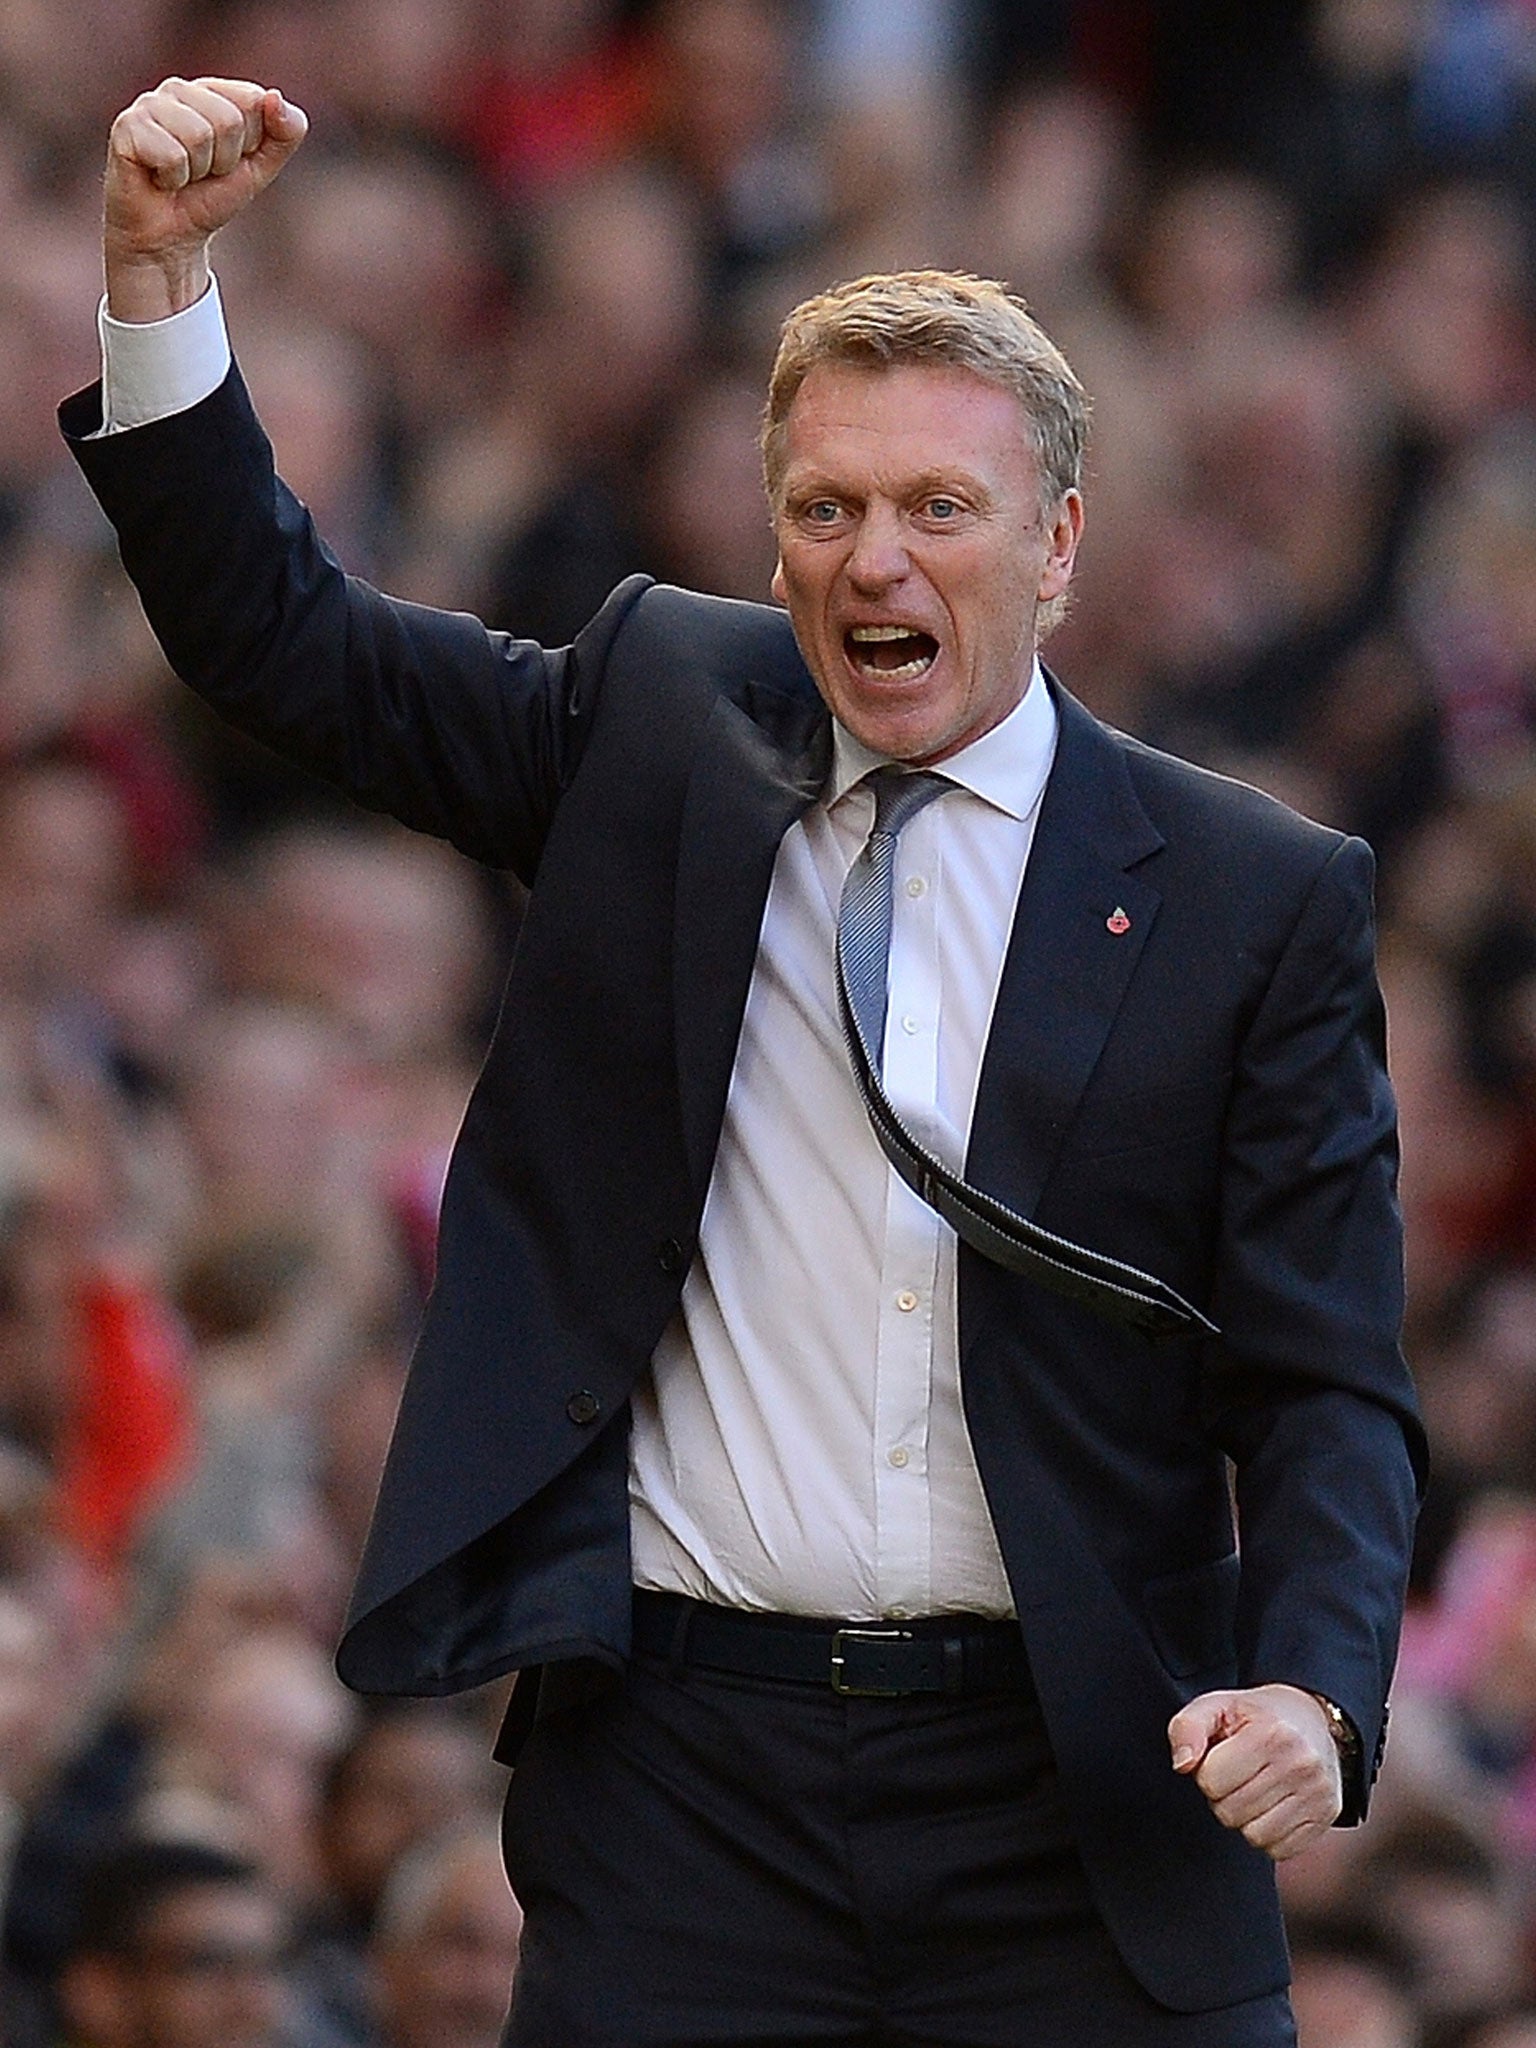 David Moyes reacts after United’s winner against Stoke